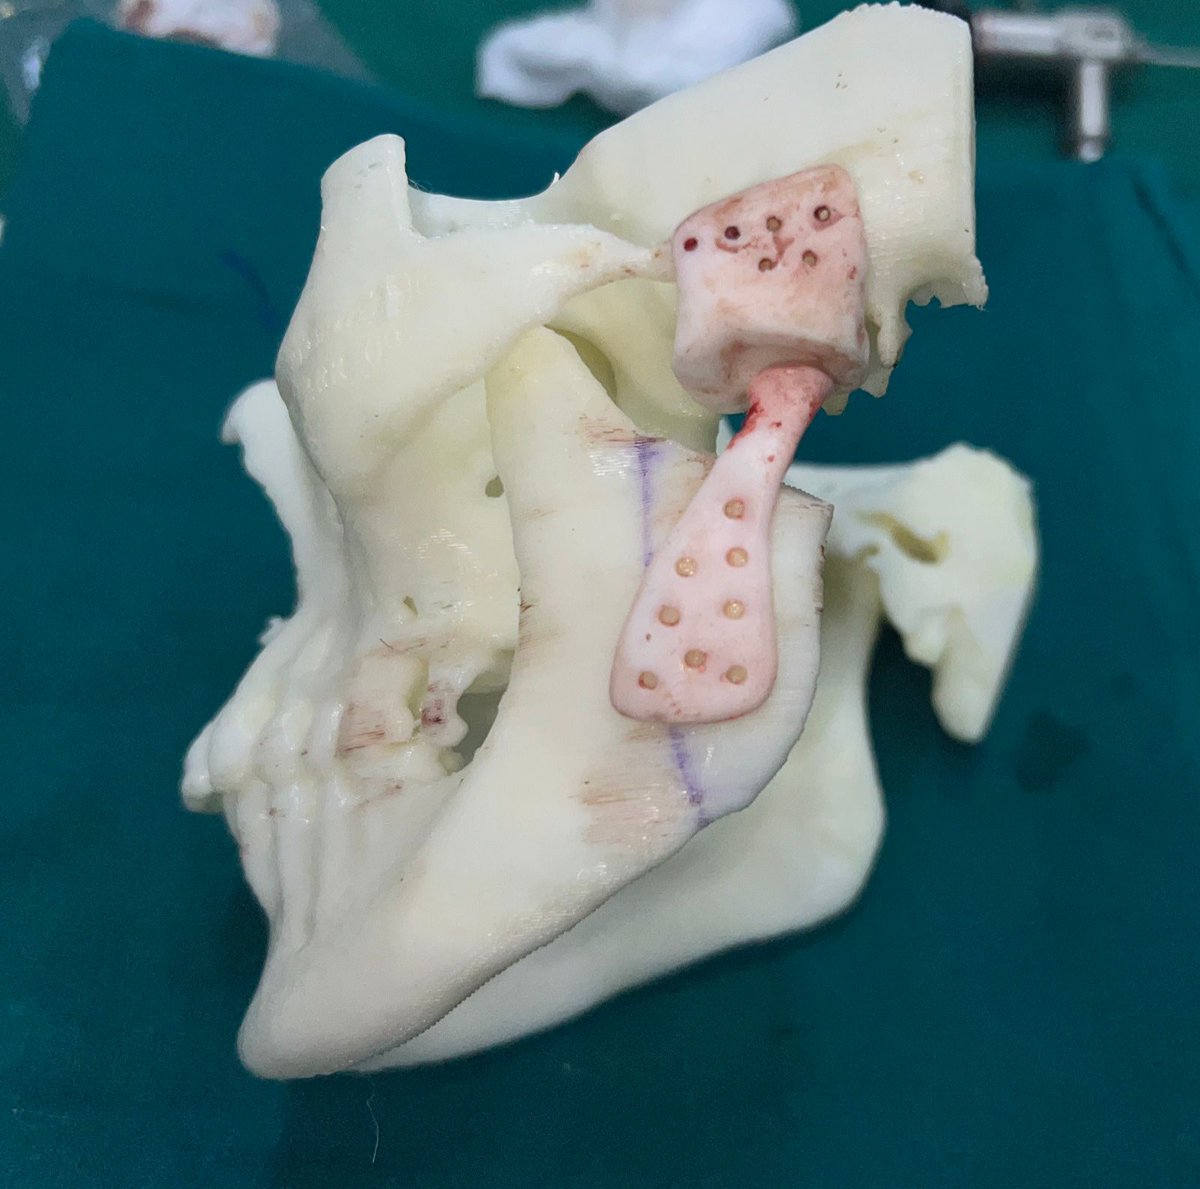 Here's the 3D model of Saba Shaikh's skull. After chemo, she developed locked jaw, surviving on a liquid diet for a year, weighing only 40kgs. Using MRI and CT scans, doctors used this cutting-edge tech to understand her skull's anatomy for her surgery. indianexpress.com/article/cities…